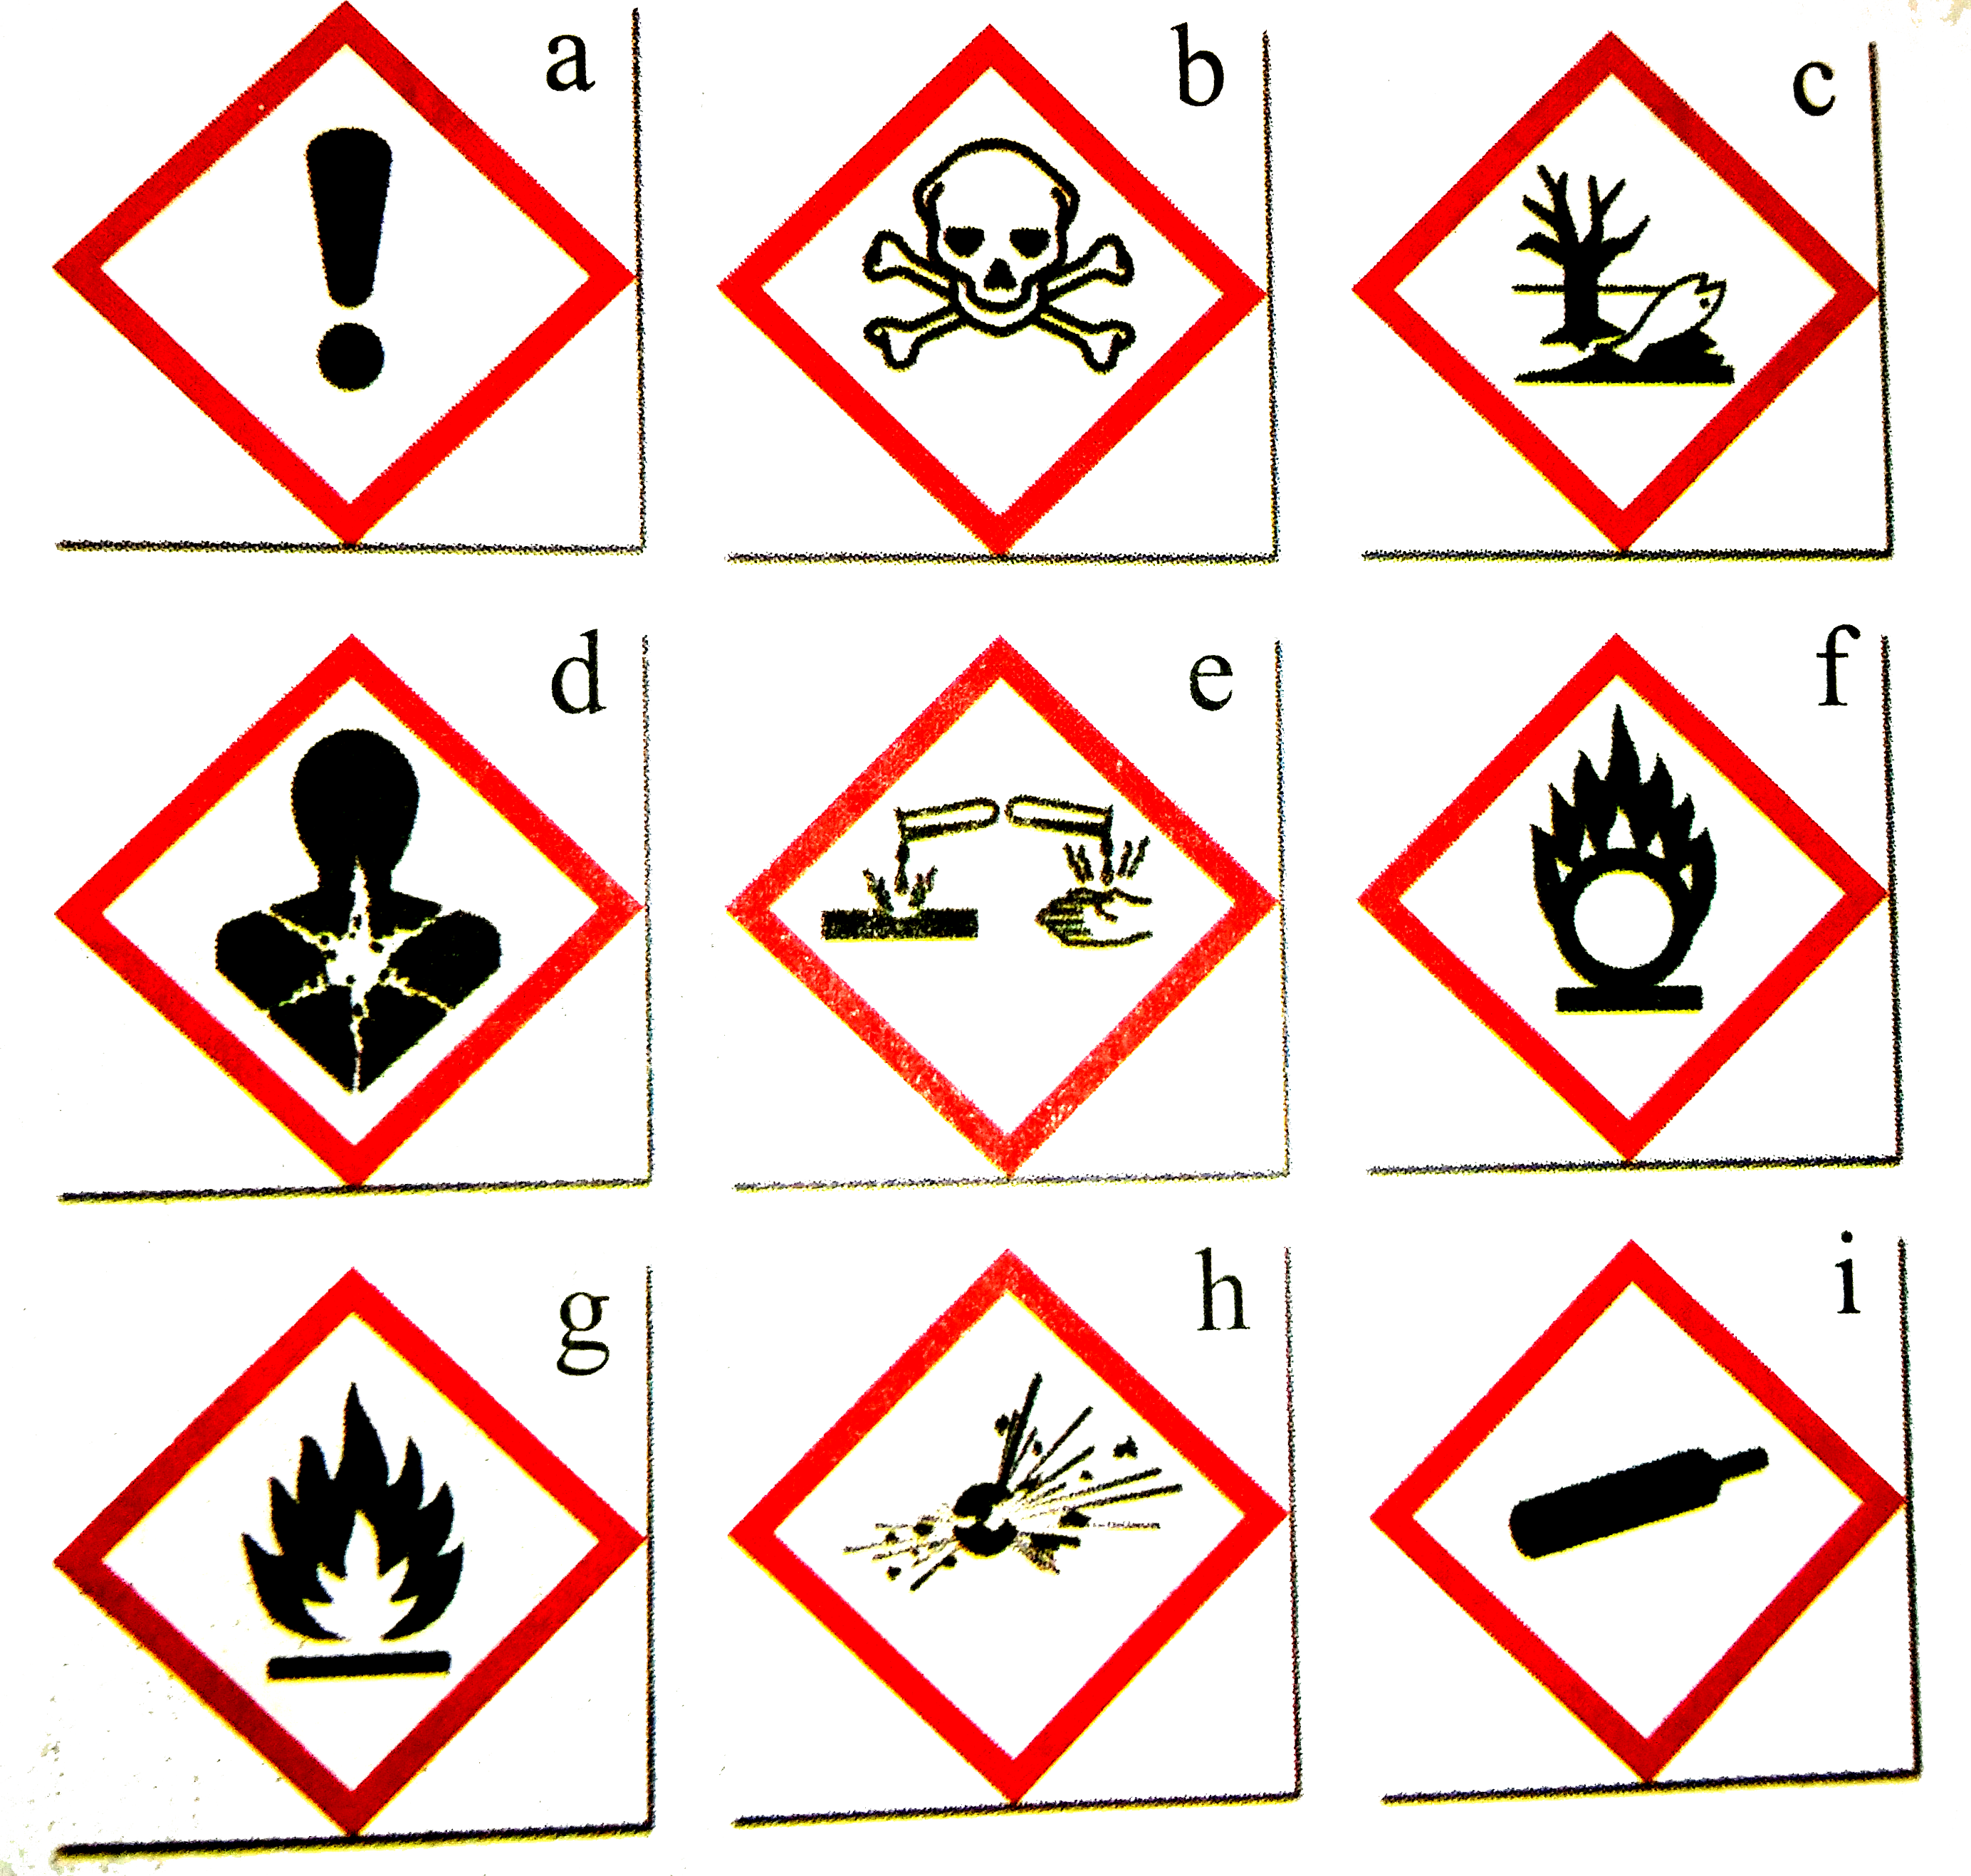 Some symbols are given below. Explain those symbols. Which disasters may occur if those symbols are ignored?